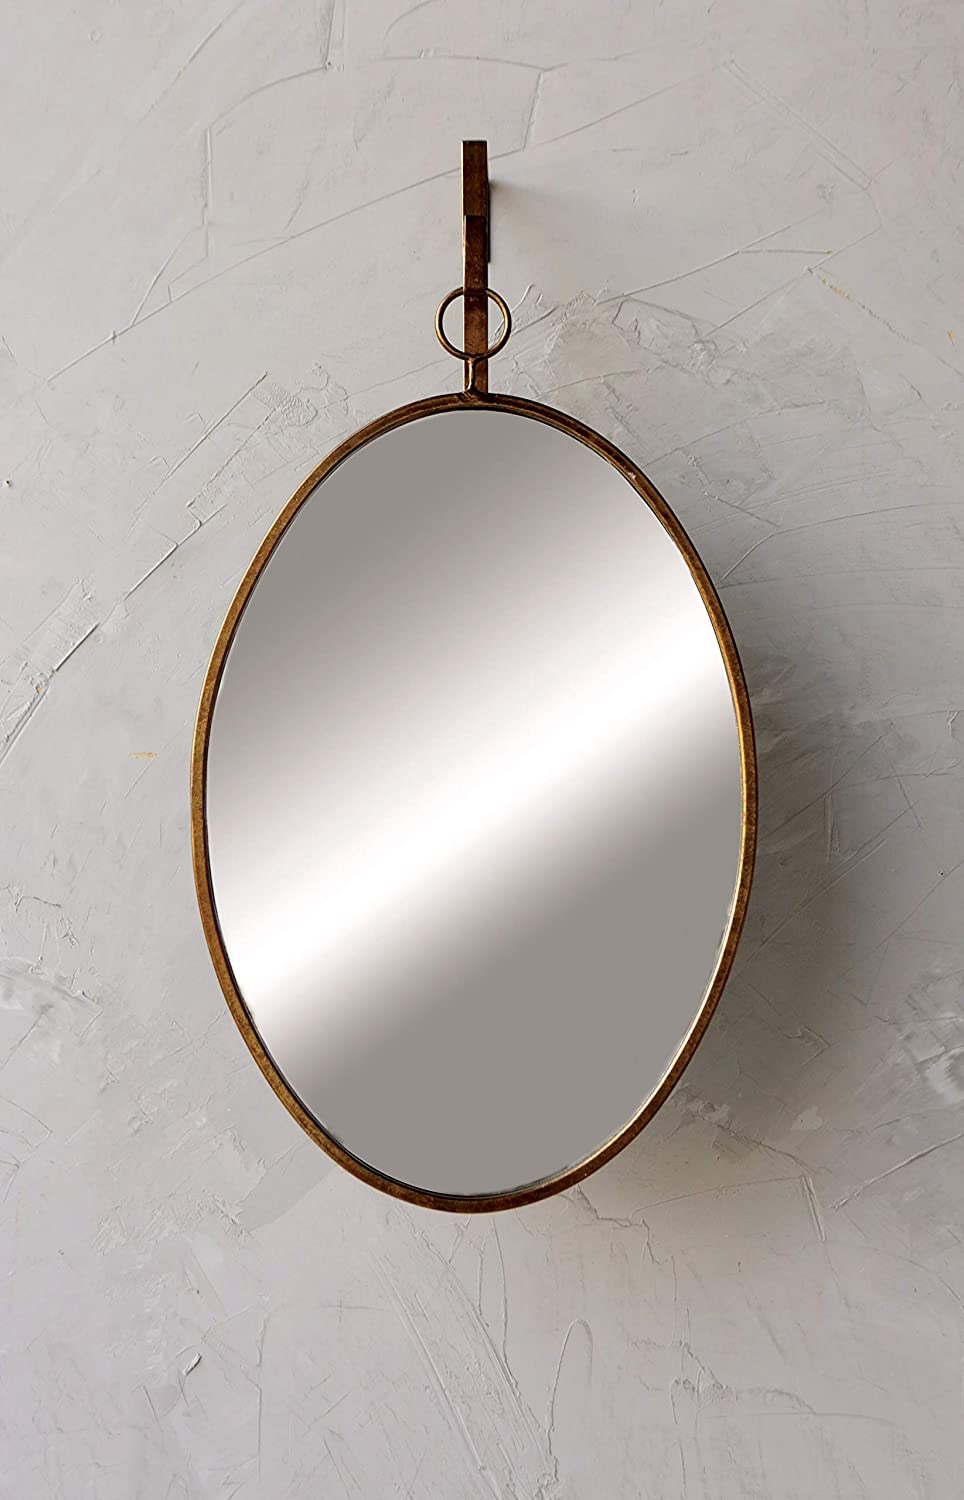 Oval Wall Mirror with Distressed Metal Frame & Hanging Bracket (Set of 2 Pieces) - Image 1